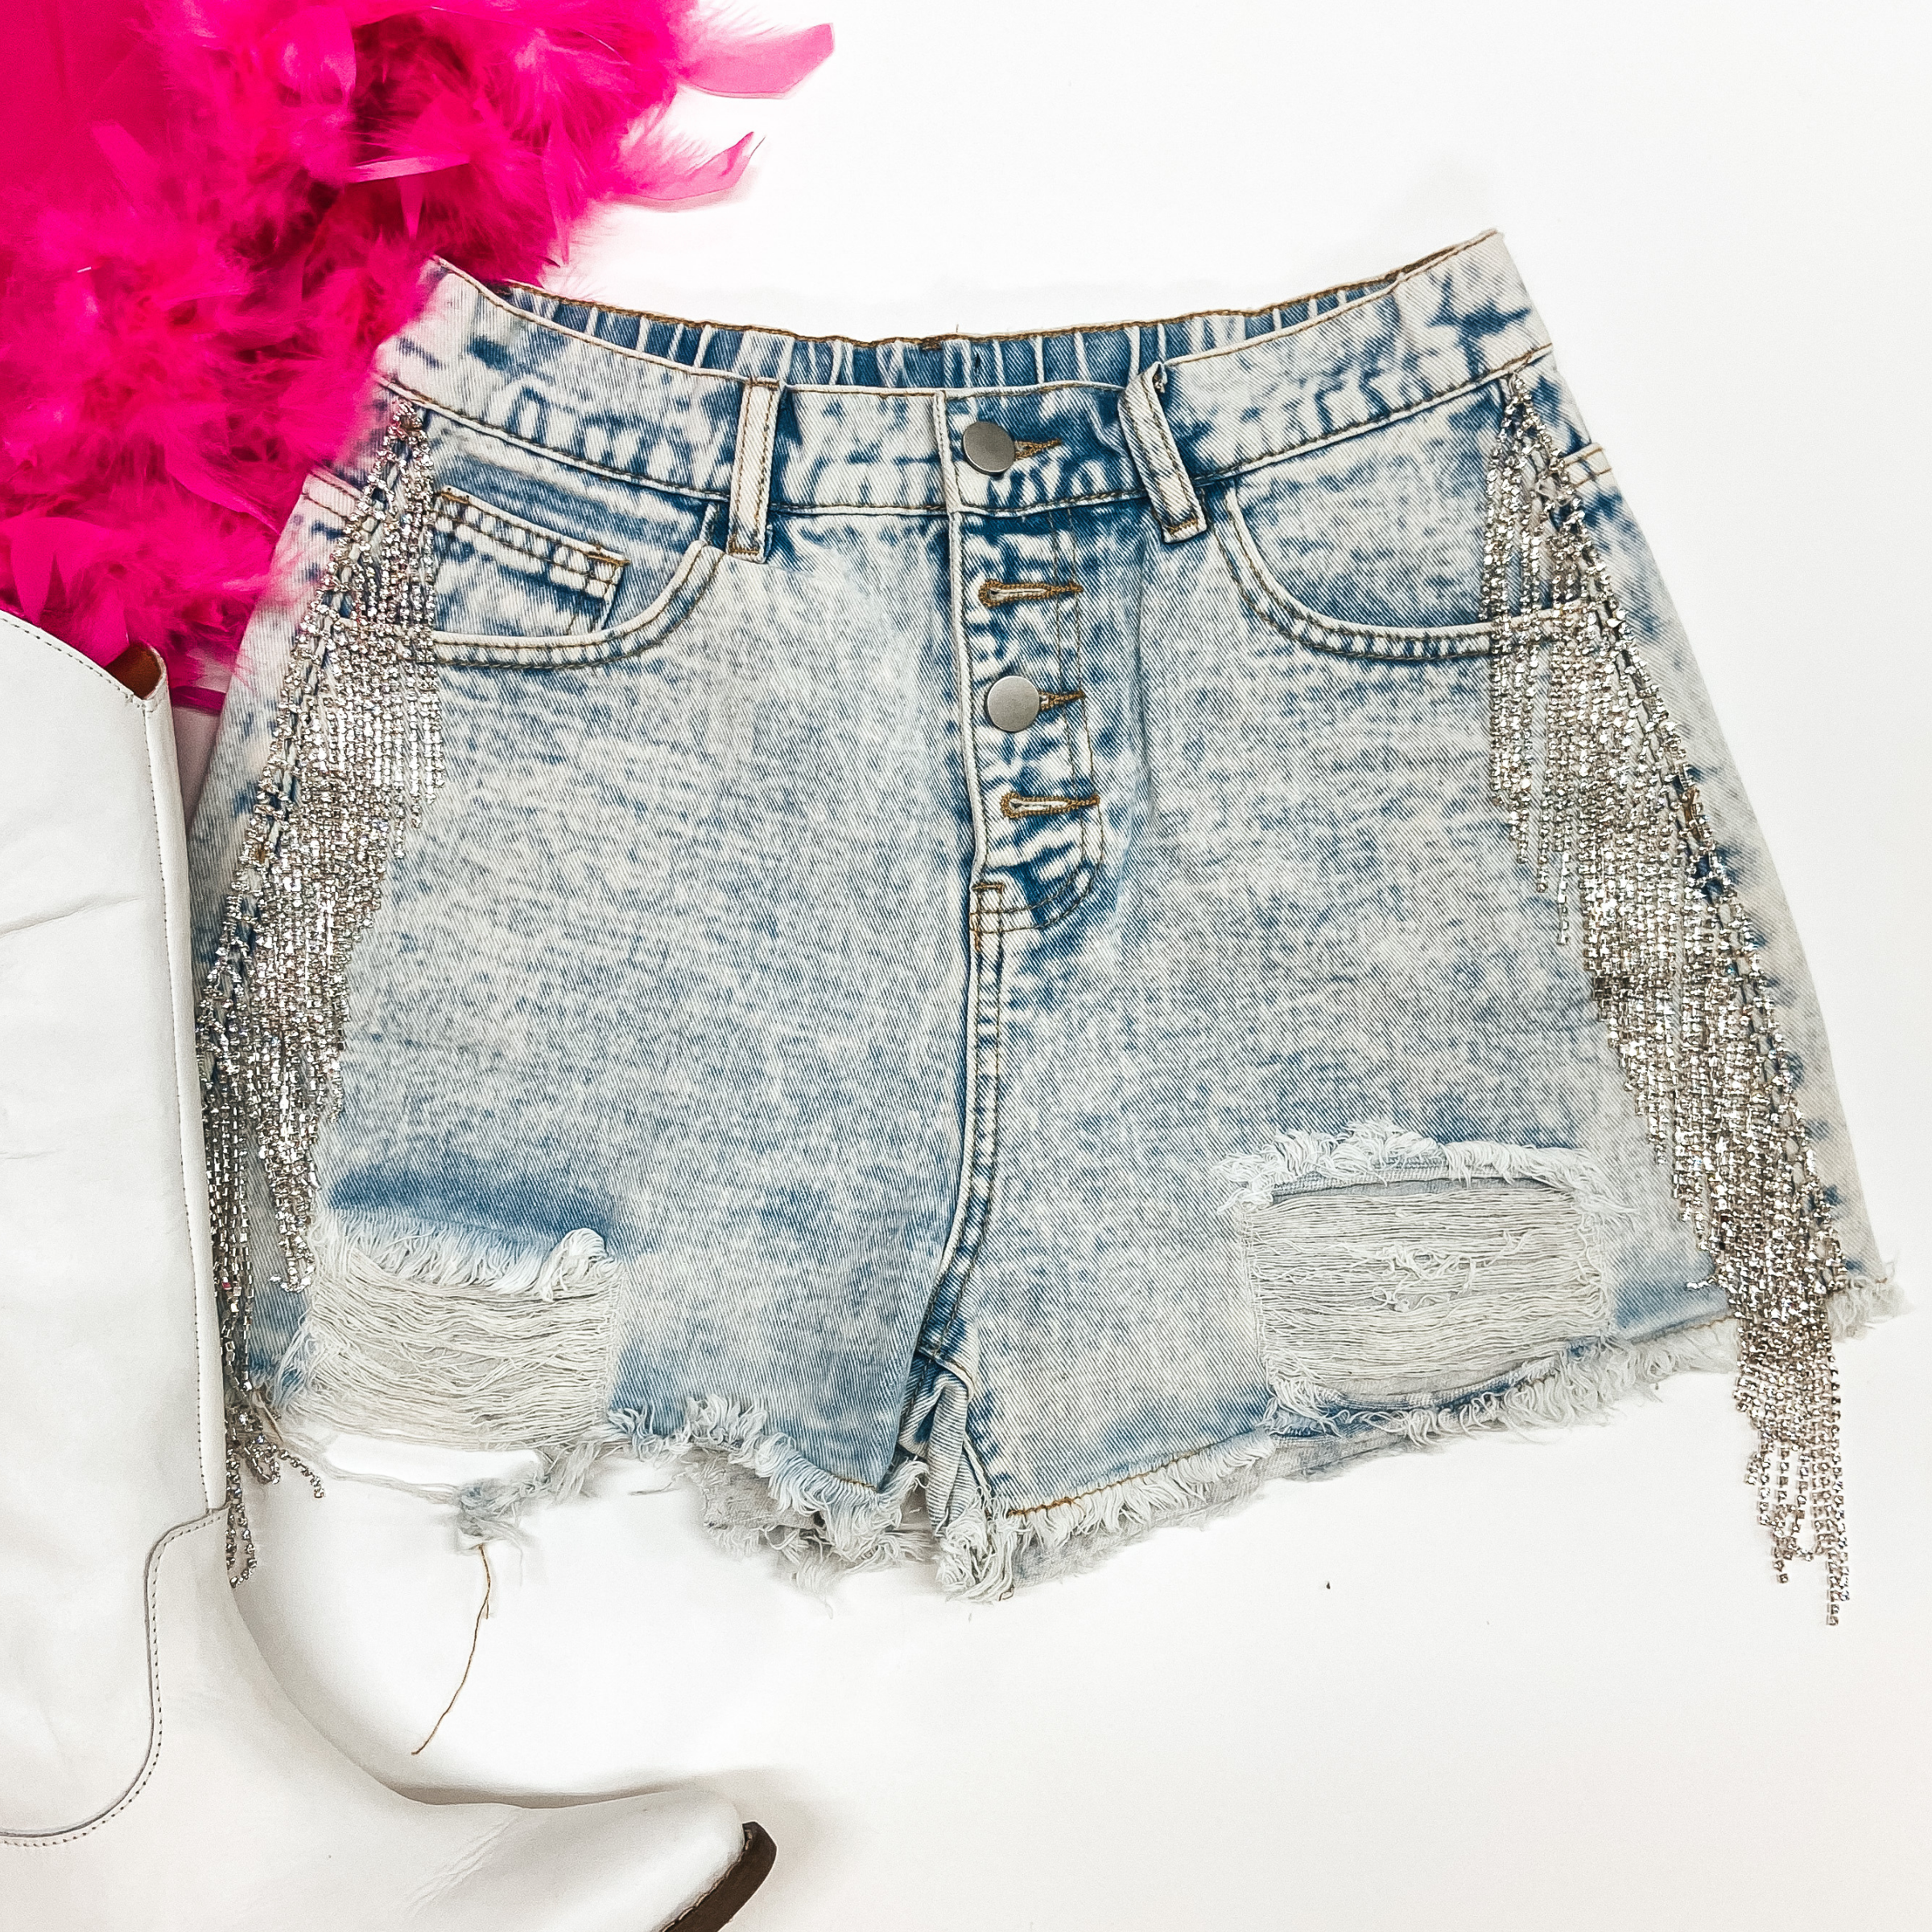 A pair of distressed light wash shorts with crystal fringe on the hips. These button fly shorts are pictured on a white background with white boots and  a pink feather top.